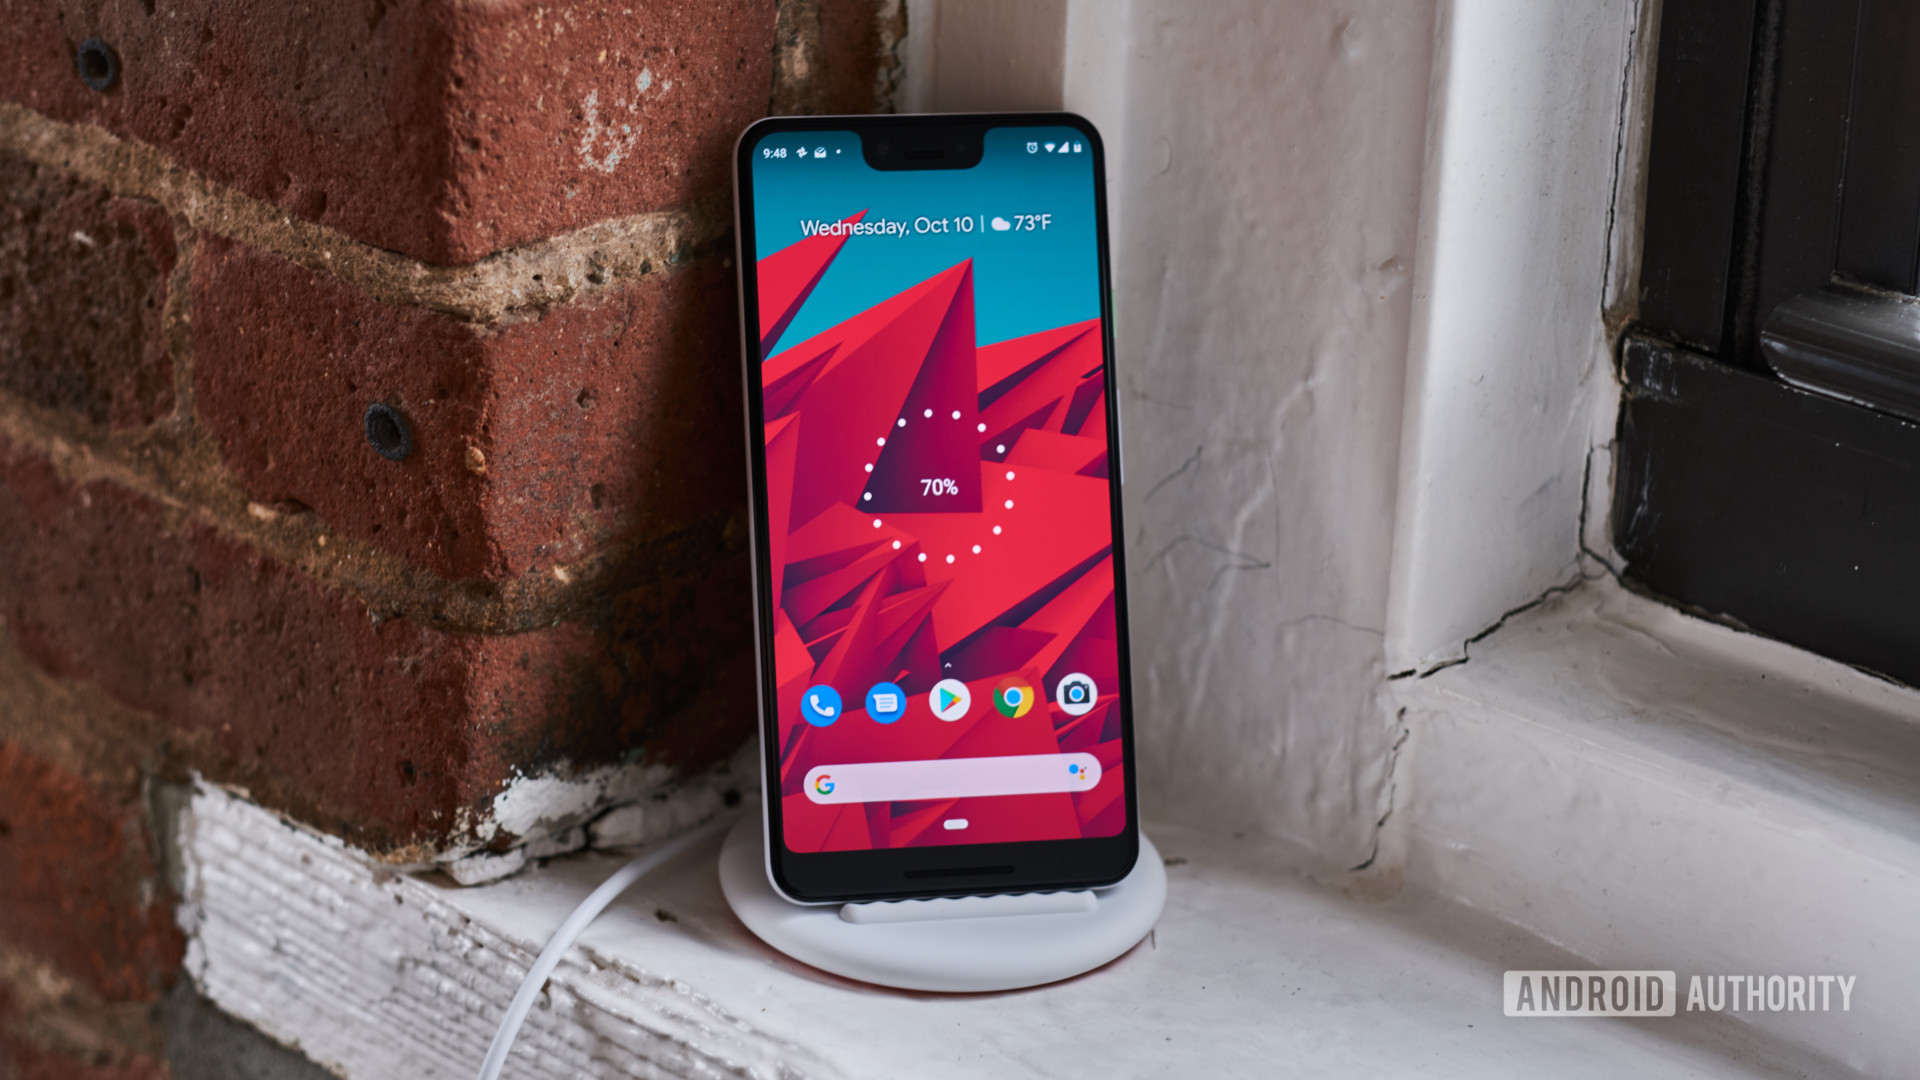 Photo of Google Pixel 3 charging on Pixel Stand